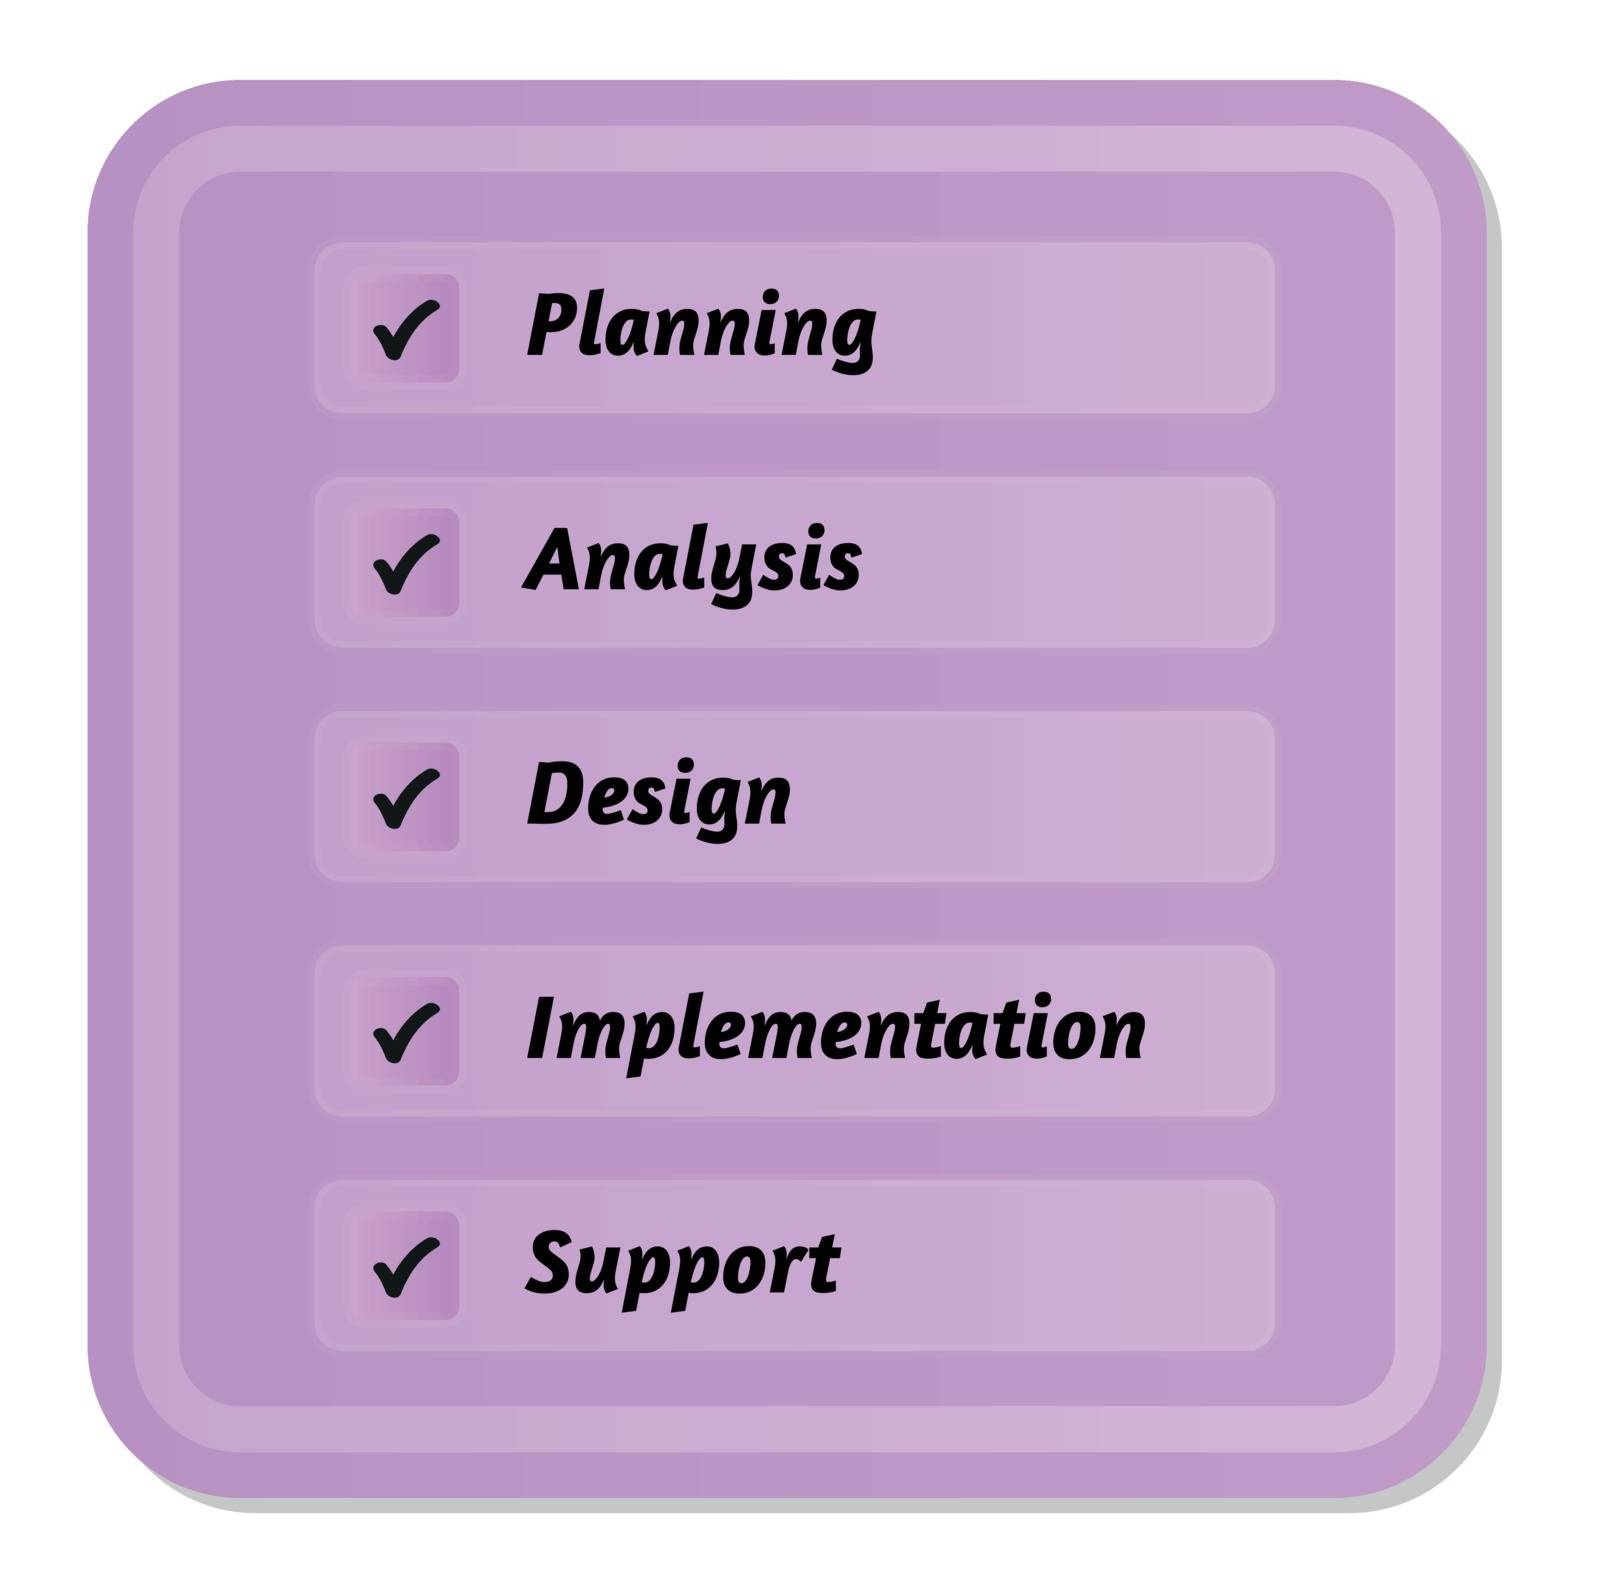 five steps in development cycle and checked symbols - planning, analysis, design, implementation and support